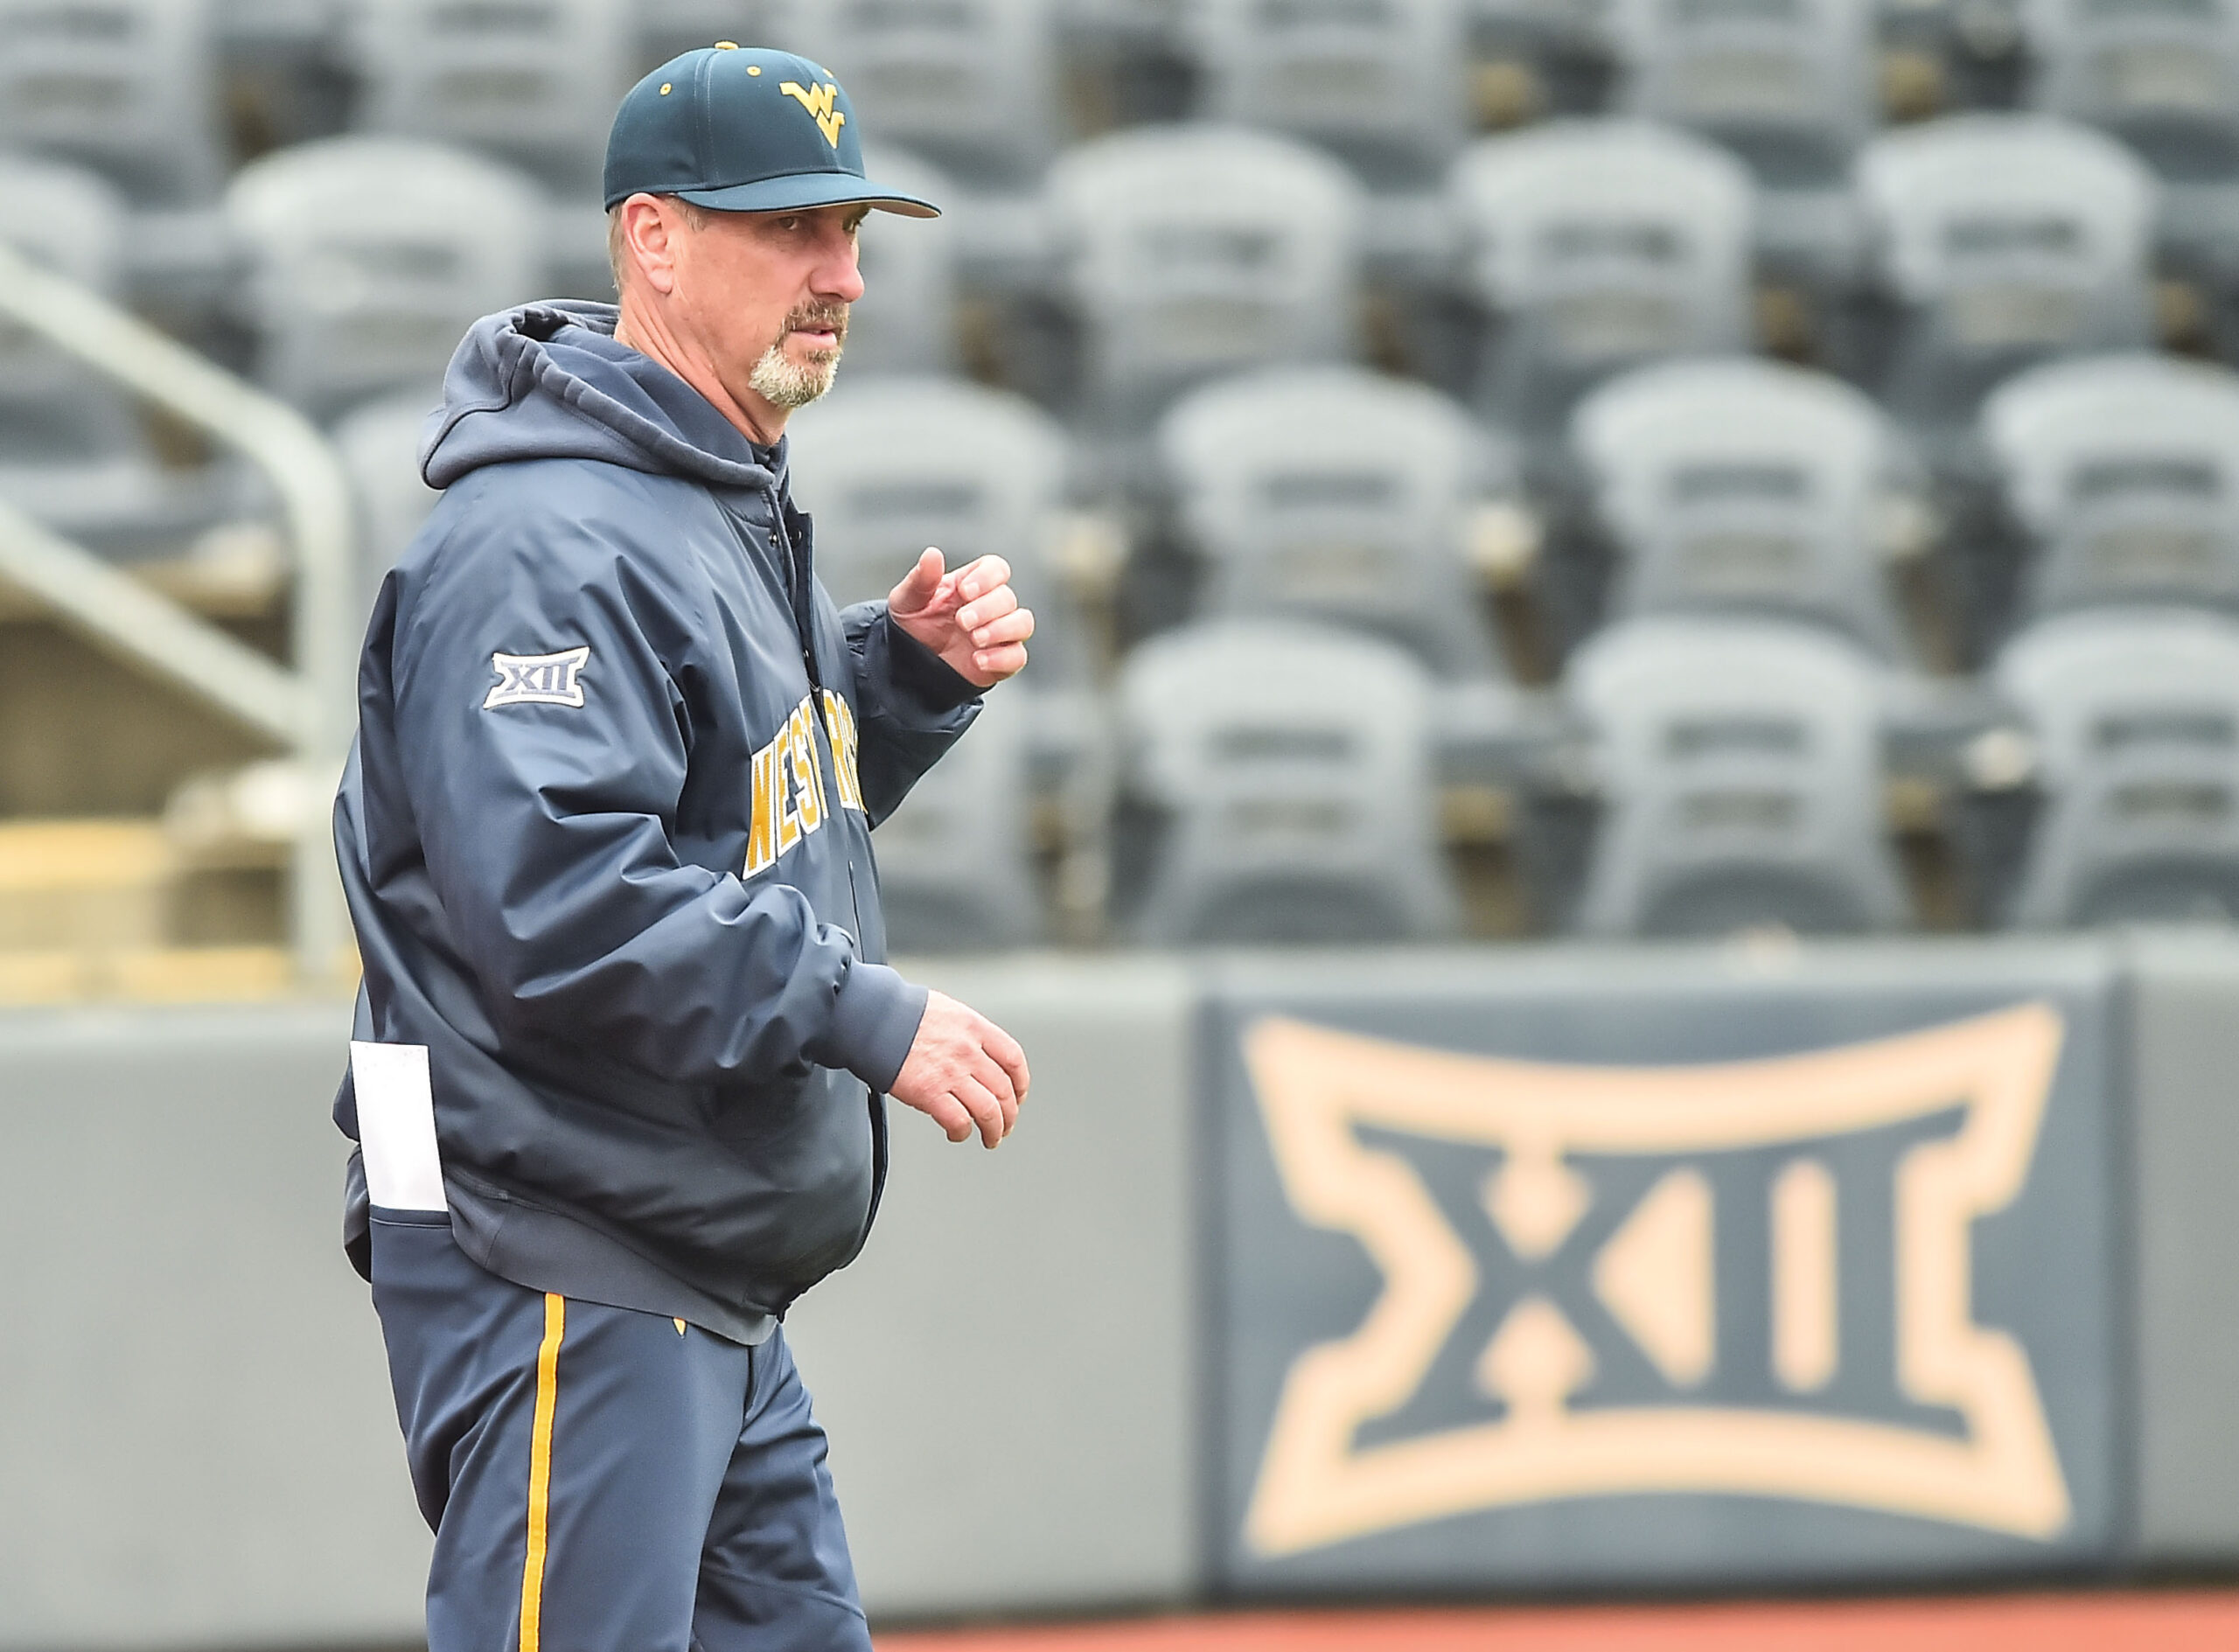 Roster management nothing new for WVU baseball coach Randy Mazey ...